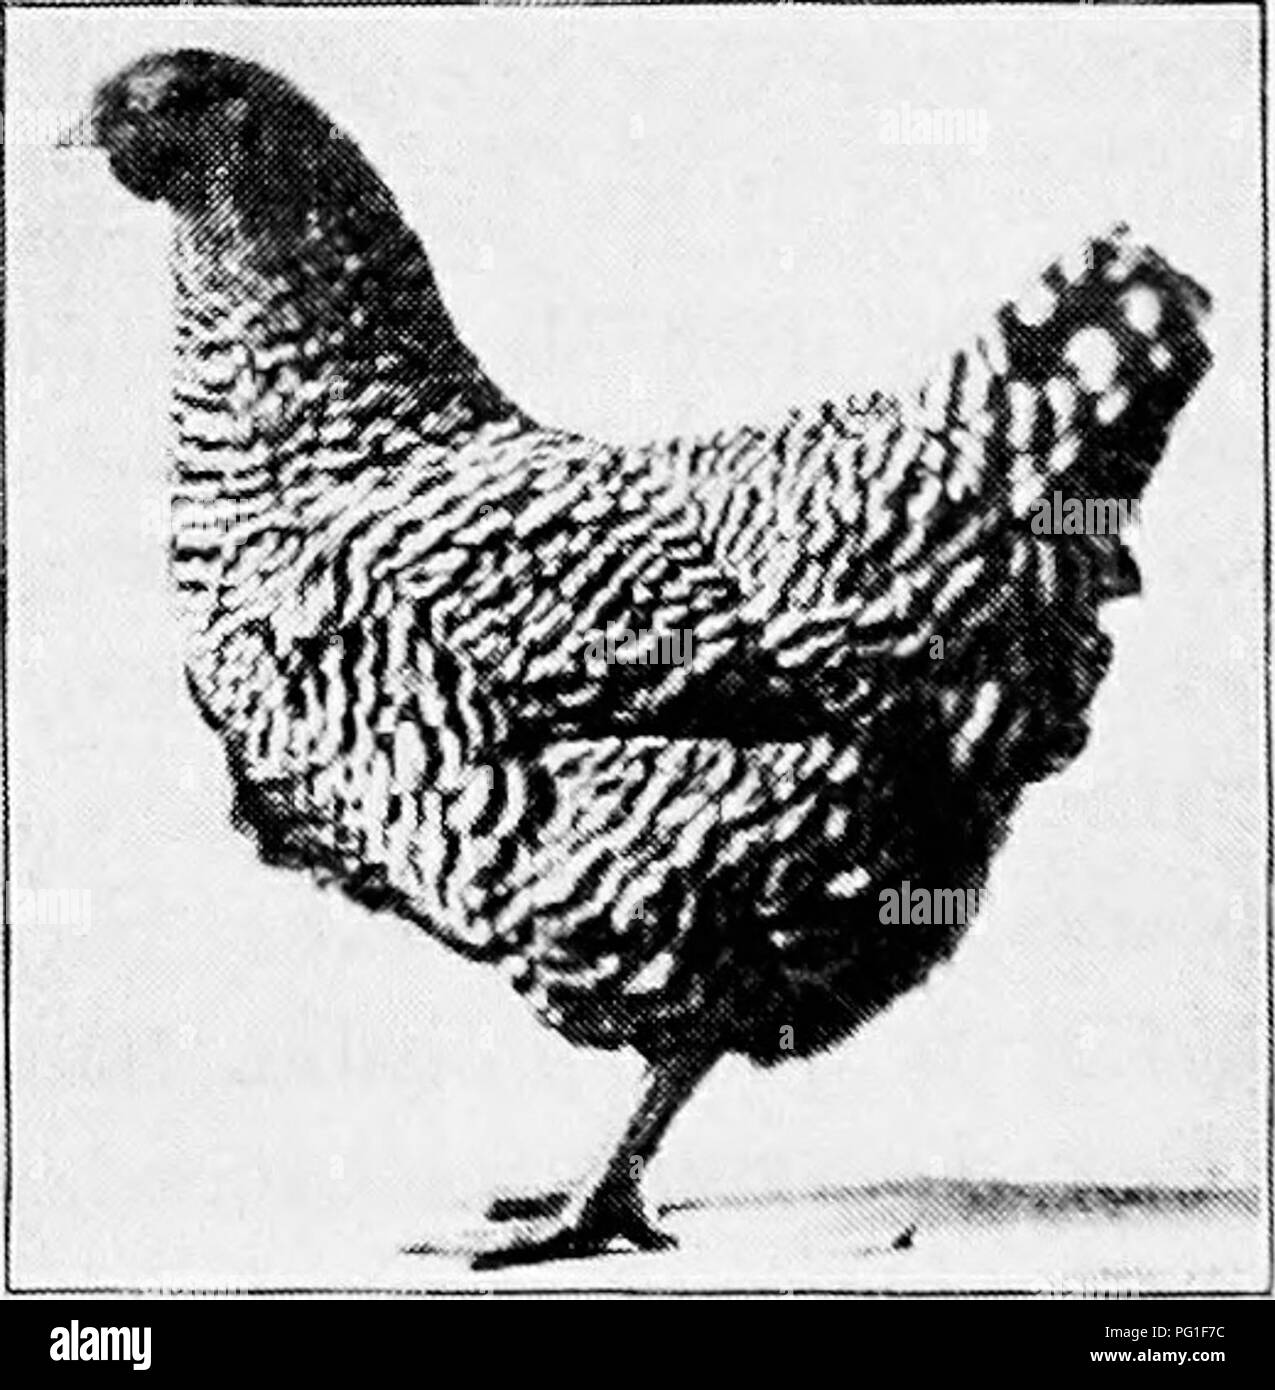 . Principles and practice of poultry culture . Poultry. 396 POULTRY CULTURE &quot;% /'^  ;1 ^^^^^m ^*SM&amp; ^^y Uu Fig. 392. Dominique coclcerel. (Photograph from owner, W. H. Davenport, Coleraine, Massachusetts) Dominiqties, as devel- oped either by amalgama- tion of early barred types or by preference for the type which became fixed and dominant, were small medium-sized fowls with rose combs. In shape and carriage they resembled Hamburgs and Leghorns, though more substantially built. They were rugged and hardy, good layers, fattened well, and made good table poultry. The males were much lig Stock Photo